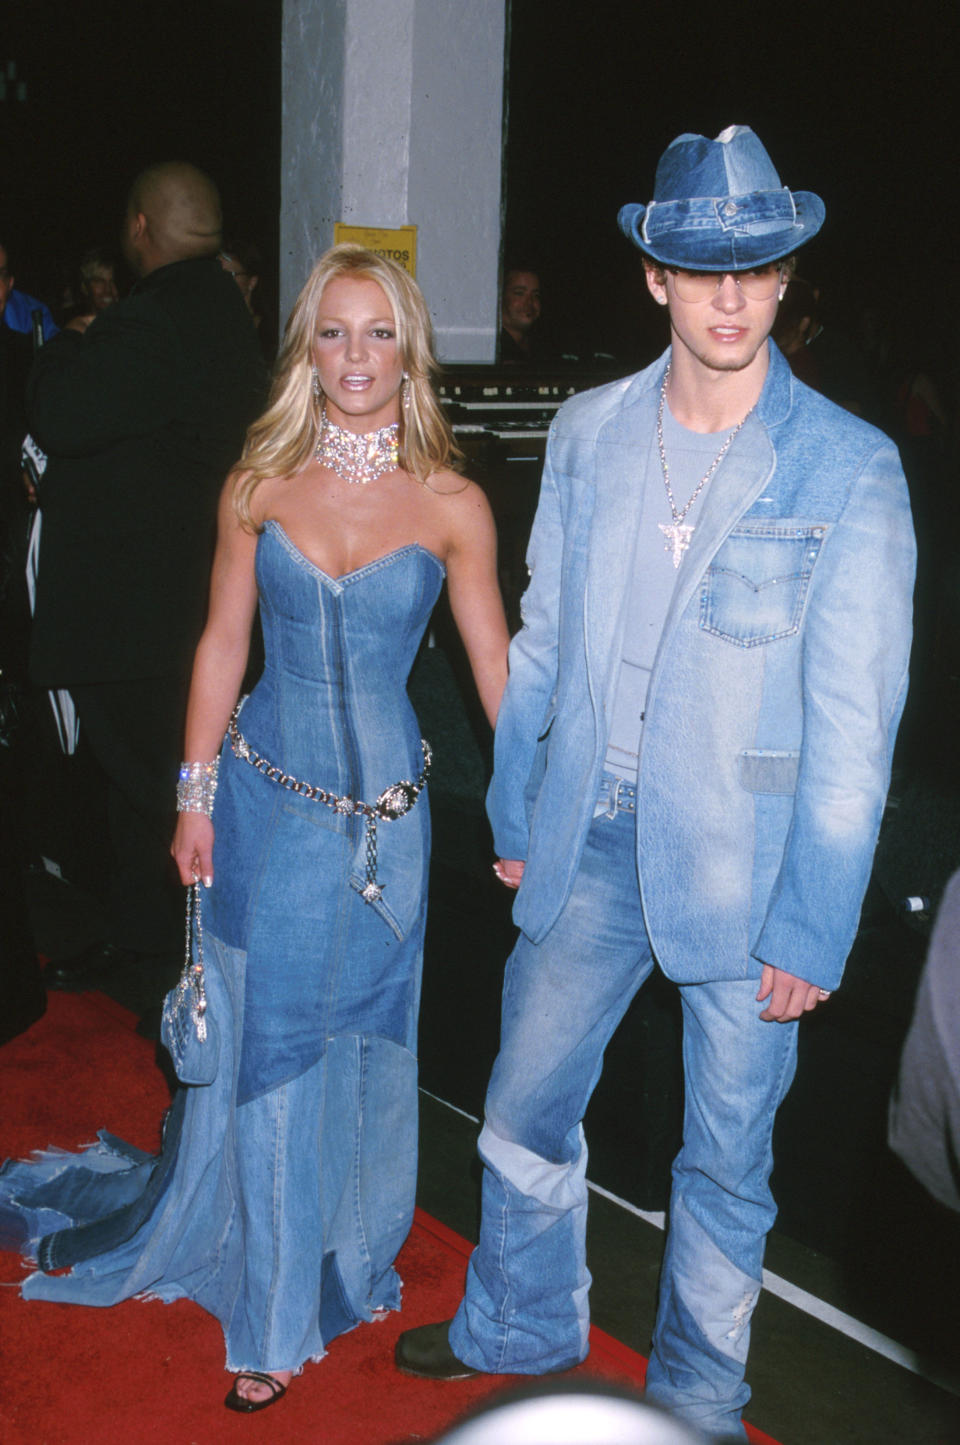 Britney Spears and Justin Timberlake at the Shrine Auditorium in Los Angeles